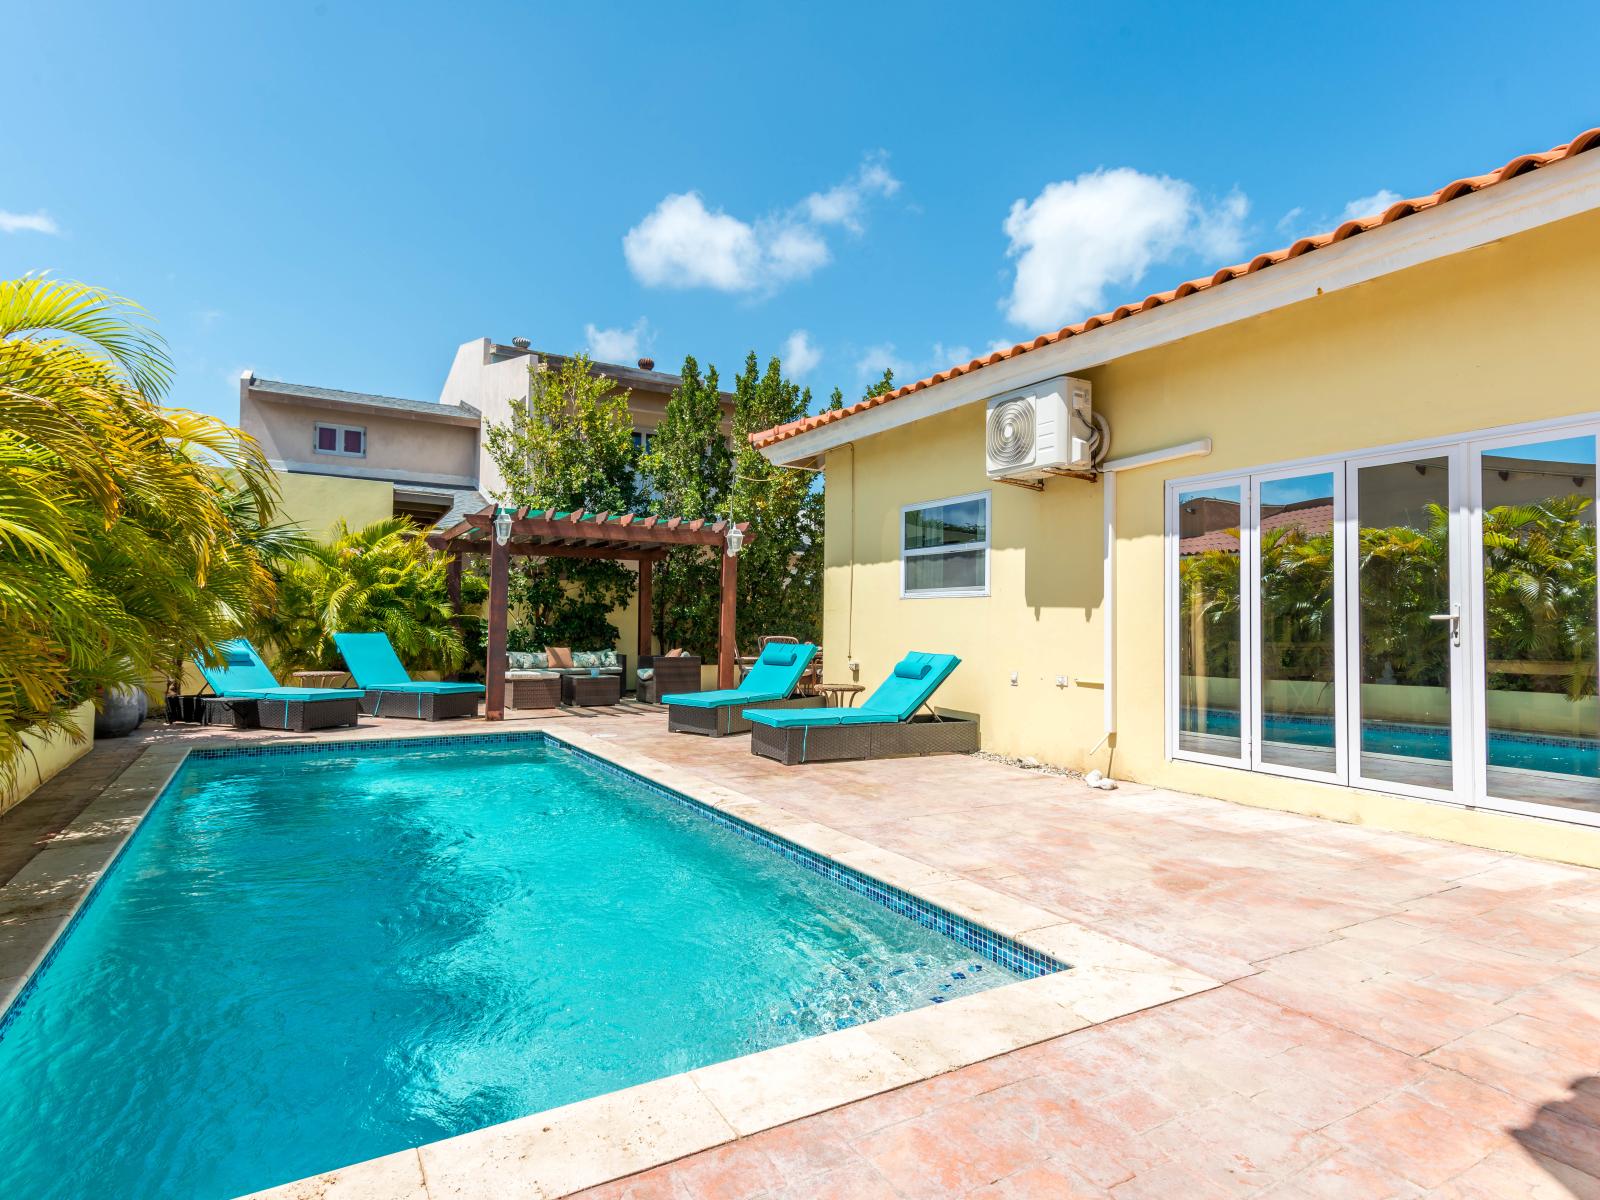 Experience poolside perfection at private pool of the home in Noord Aruba - Shimmering waters and lush landscaping creating a tranquil oasis - Comfortable seating areas for soak in the warm rays of the Aruba sun